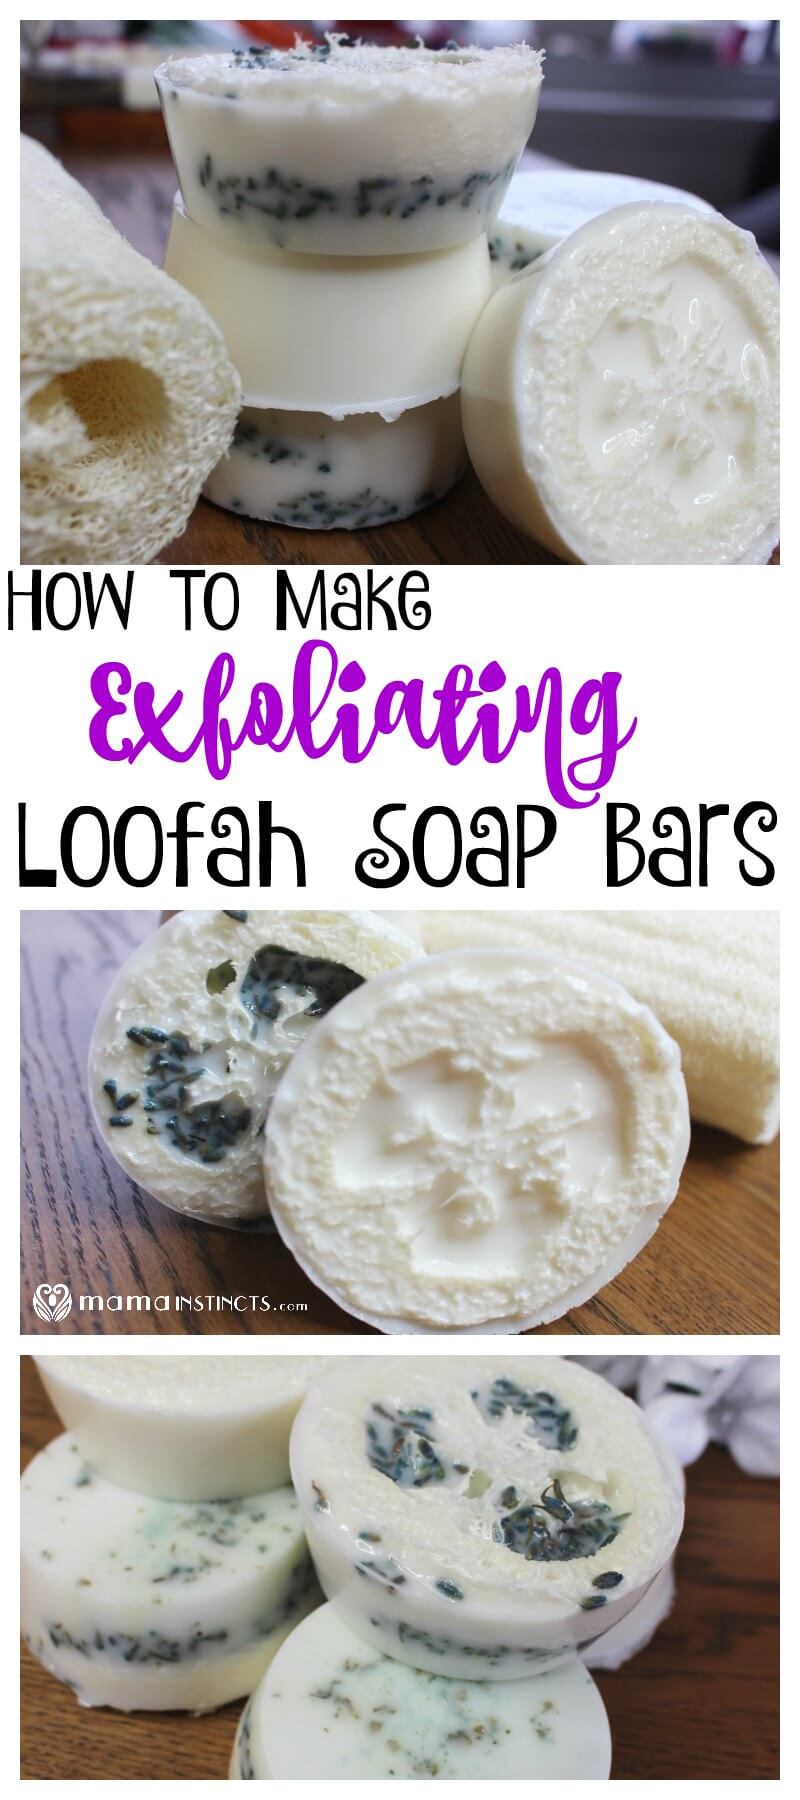 Try this DIY recipe for homemade loofah soap bars. They gently exfoliate and cleanse your skin leaving it healthy and nourished. #DIY #DIYbeauty 